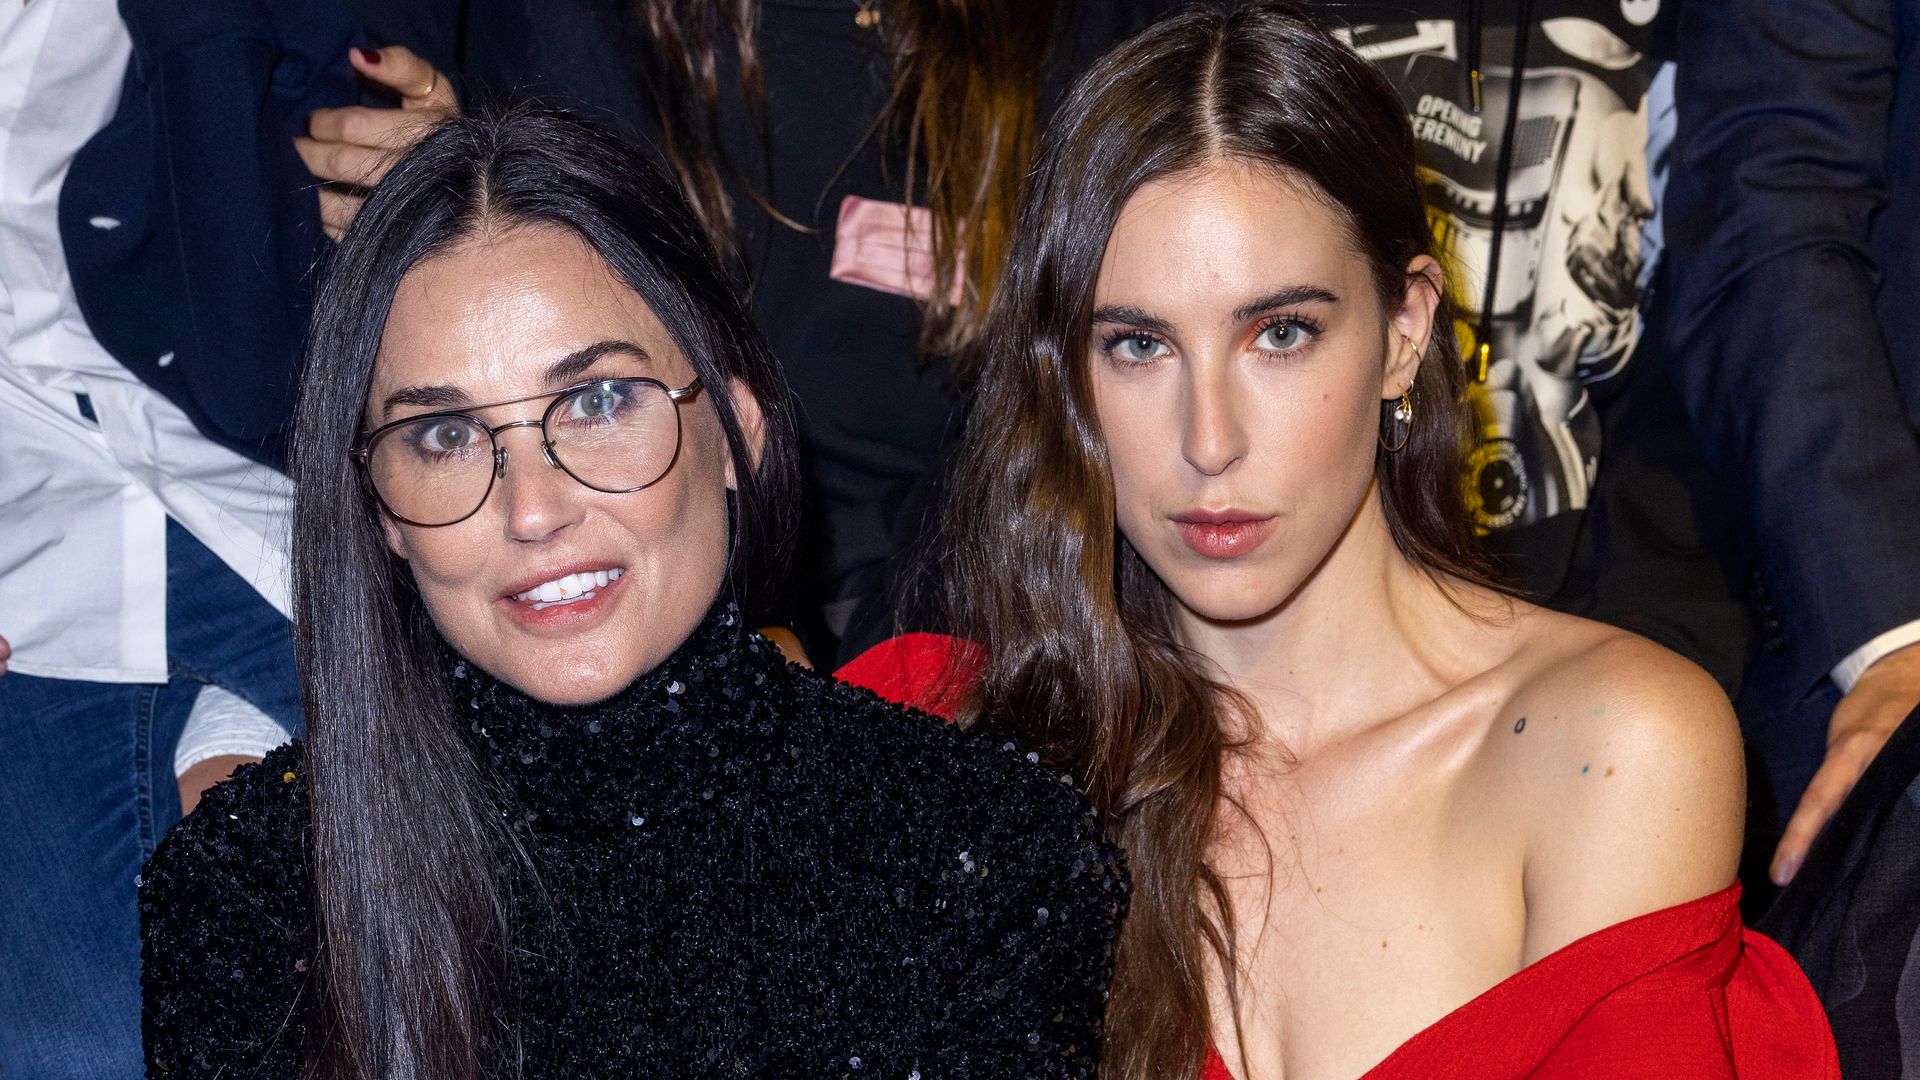 demi moore and scout willis at paris fashion week